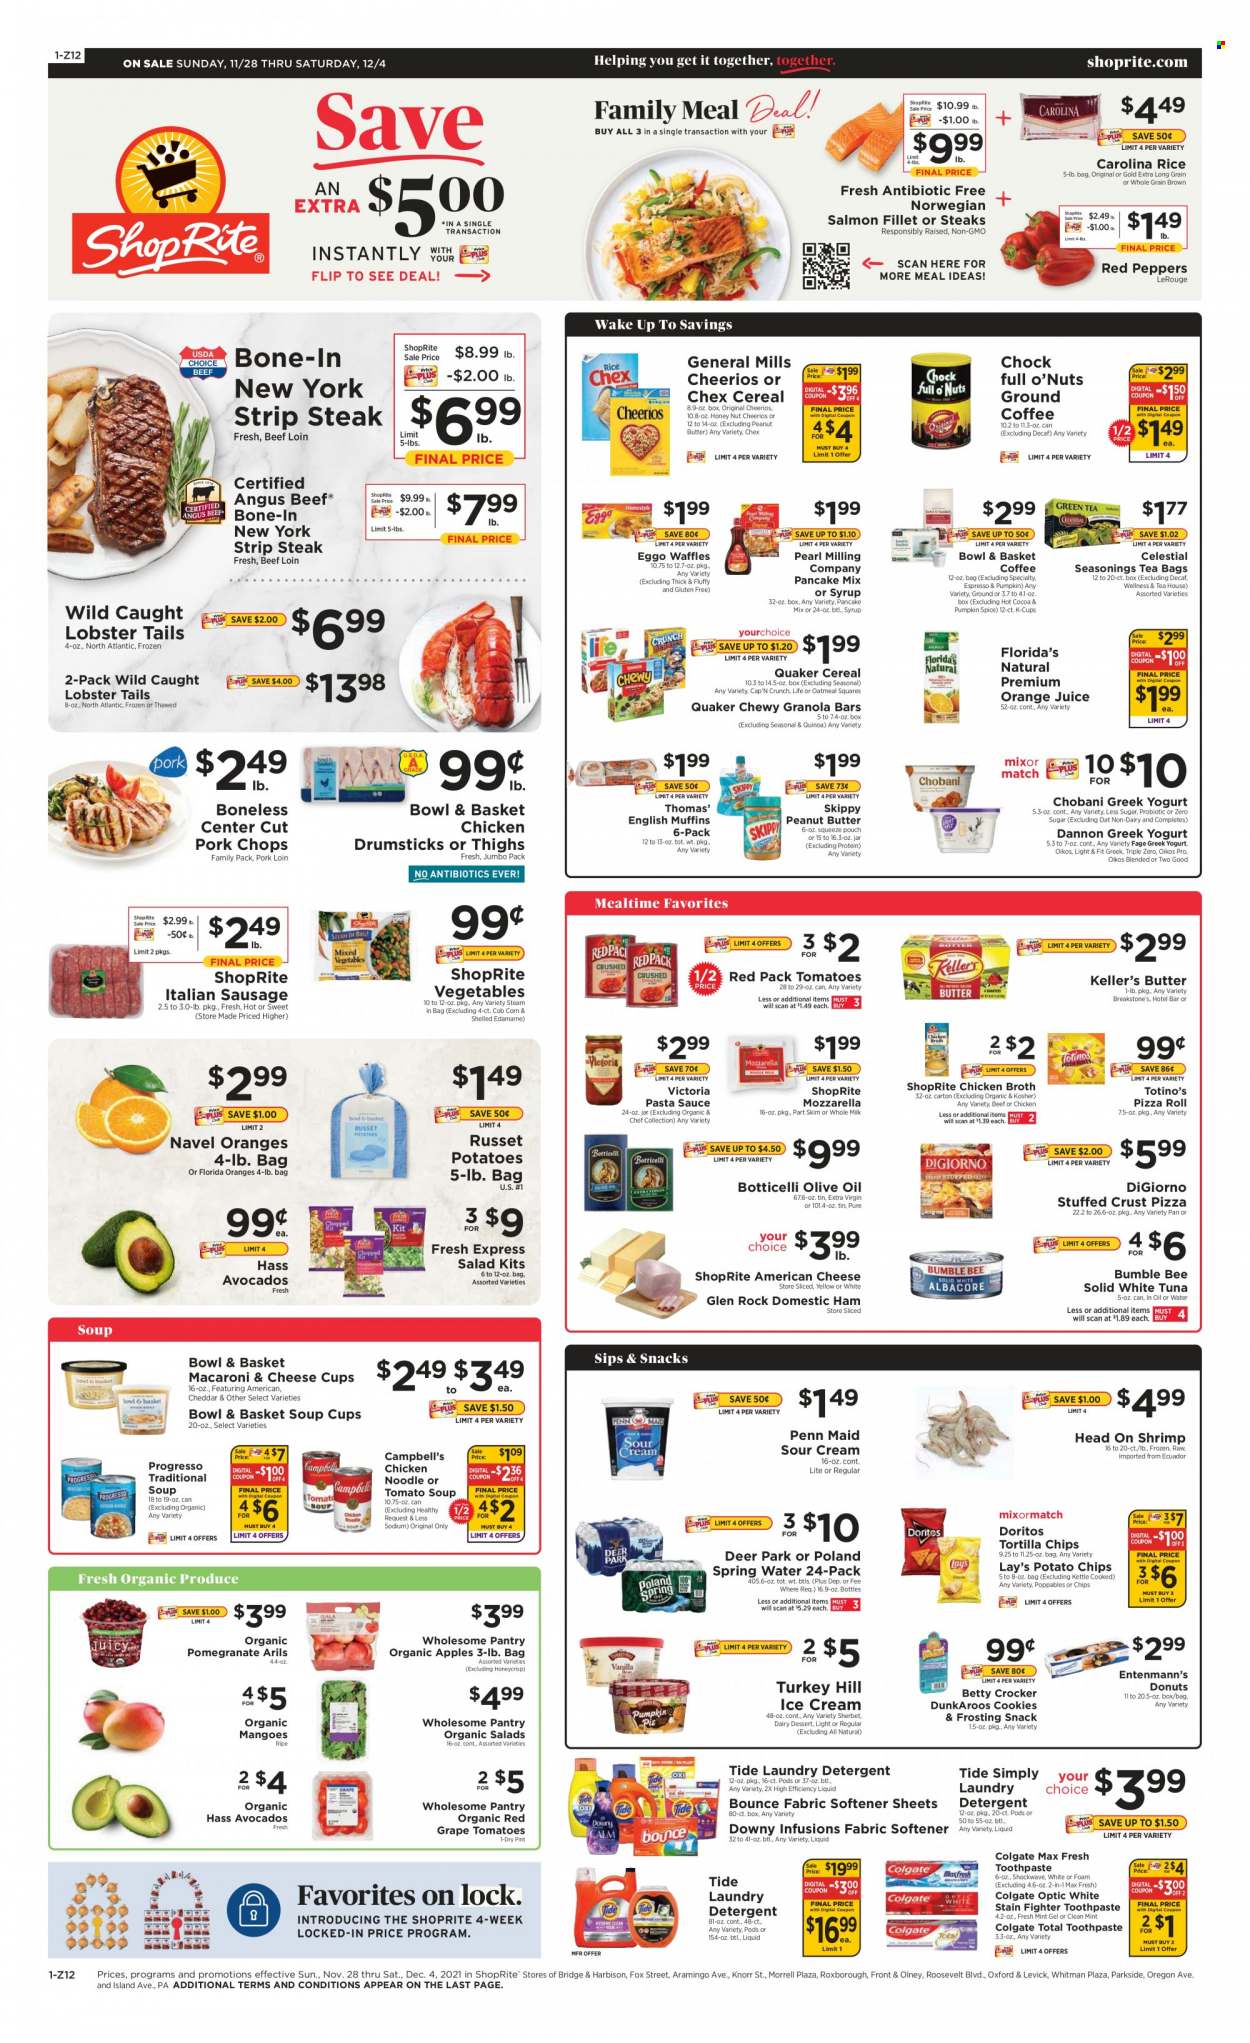 ShopRite Flyer - 11/28/2021 - 12/04/2021 - Sales products - pizza rolls, Bowl & Basket, donut, Entenmann's, corn, Edamame, russet potatoes, salad, peppers, red peppers, apples, avocado, lobster, salmon, salmon fillet, tuna, lobster tail, shrimps, Campbell's, tomato soup, pizza, pasta sauce, Bumble Bee, Knorr, sauce, pancake, Quaker, noodles, Progresso, ham, sausage, italian sausage, american cheese, cheese cup, greek yoghurt, Oikos, Chobani, Dannon, milk, sour cream, ice cream, sherbet, cookies, snack, Victoria, Florida's Natural, Doritos, tortilla chips, potato chips, Lay's, frosting, chicken broth, oatmeal, oats, broth, cereals, Cheerios, granola bar, Cap'n Crunch, quinoa, rice, spice, extra virgin olive oil, olive oil, peanut butter, nuts, orange juice, juice, spring water, hot cocoa, tea bags, coffee capsules, K-Cups, chicken drumsticks, chicken meat, beef meat, steak, striploin steak, pork chops, pork loin, pork meat, detergent, Tide, fabric softener, laundry detergent, Bounce, Downy laundry, Colgate, toothpaste, pan, serving bowl, pomegranate, navel oranges. Page 1.